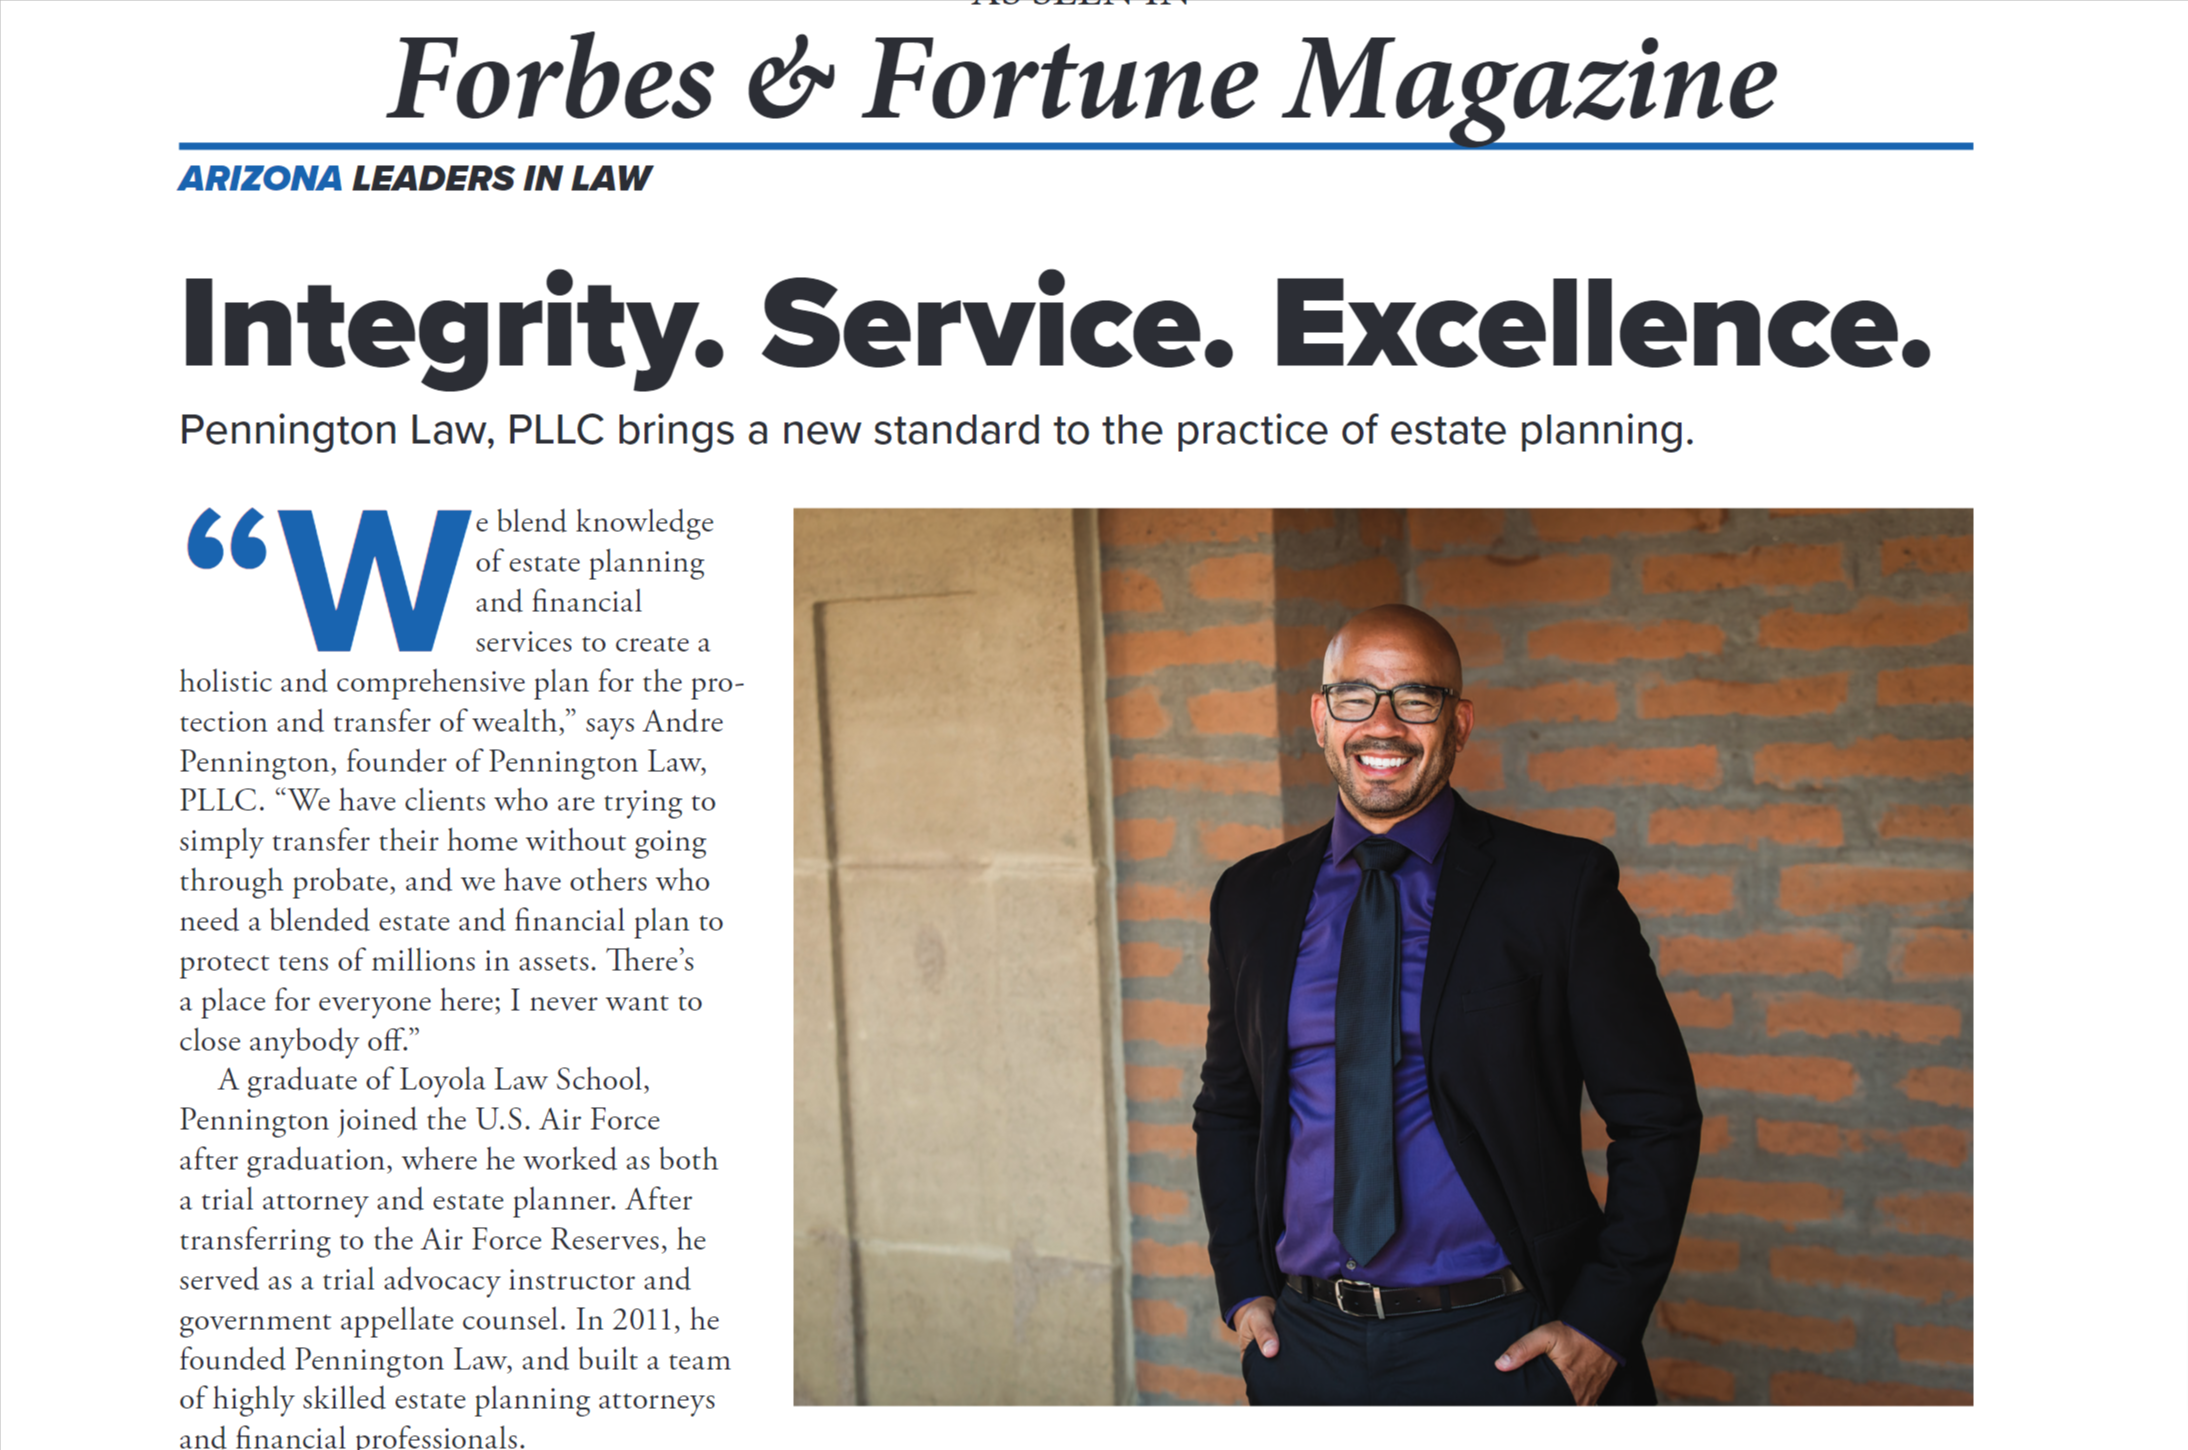 Celebrating Pennington Law's Featured Article in Forbes and Fortune